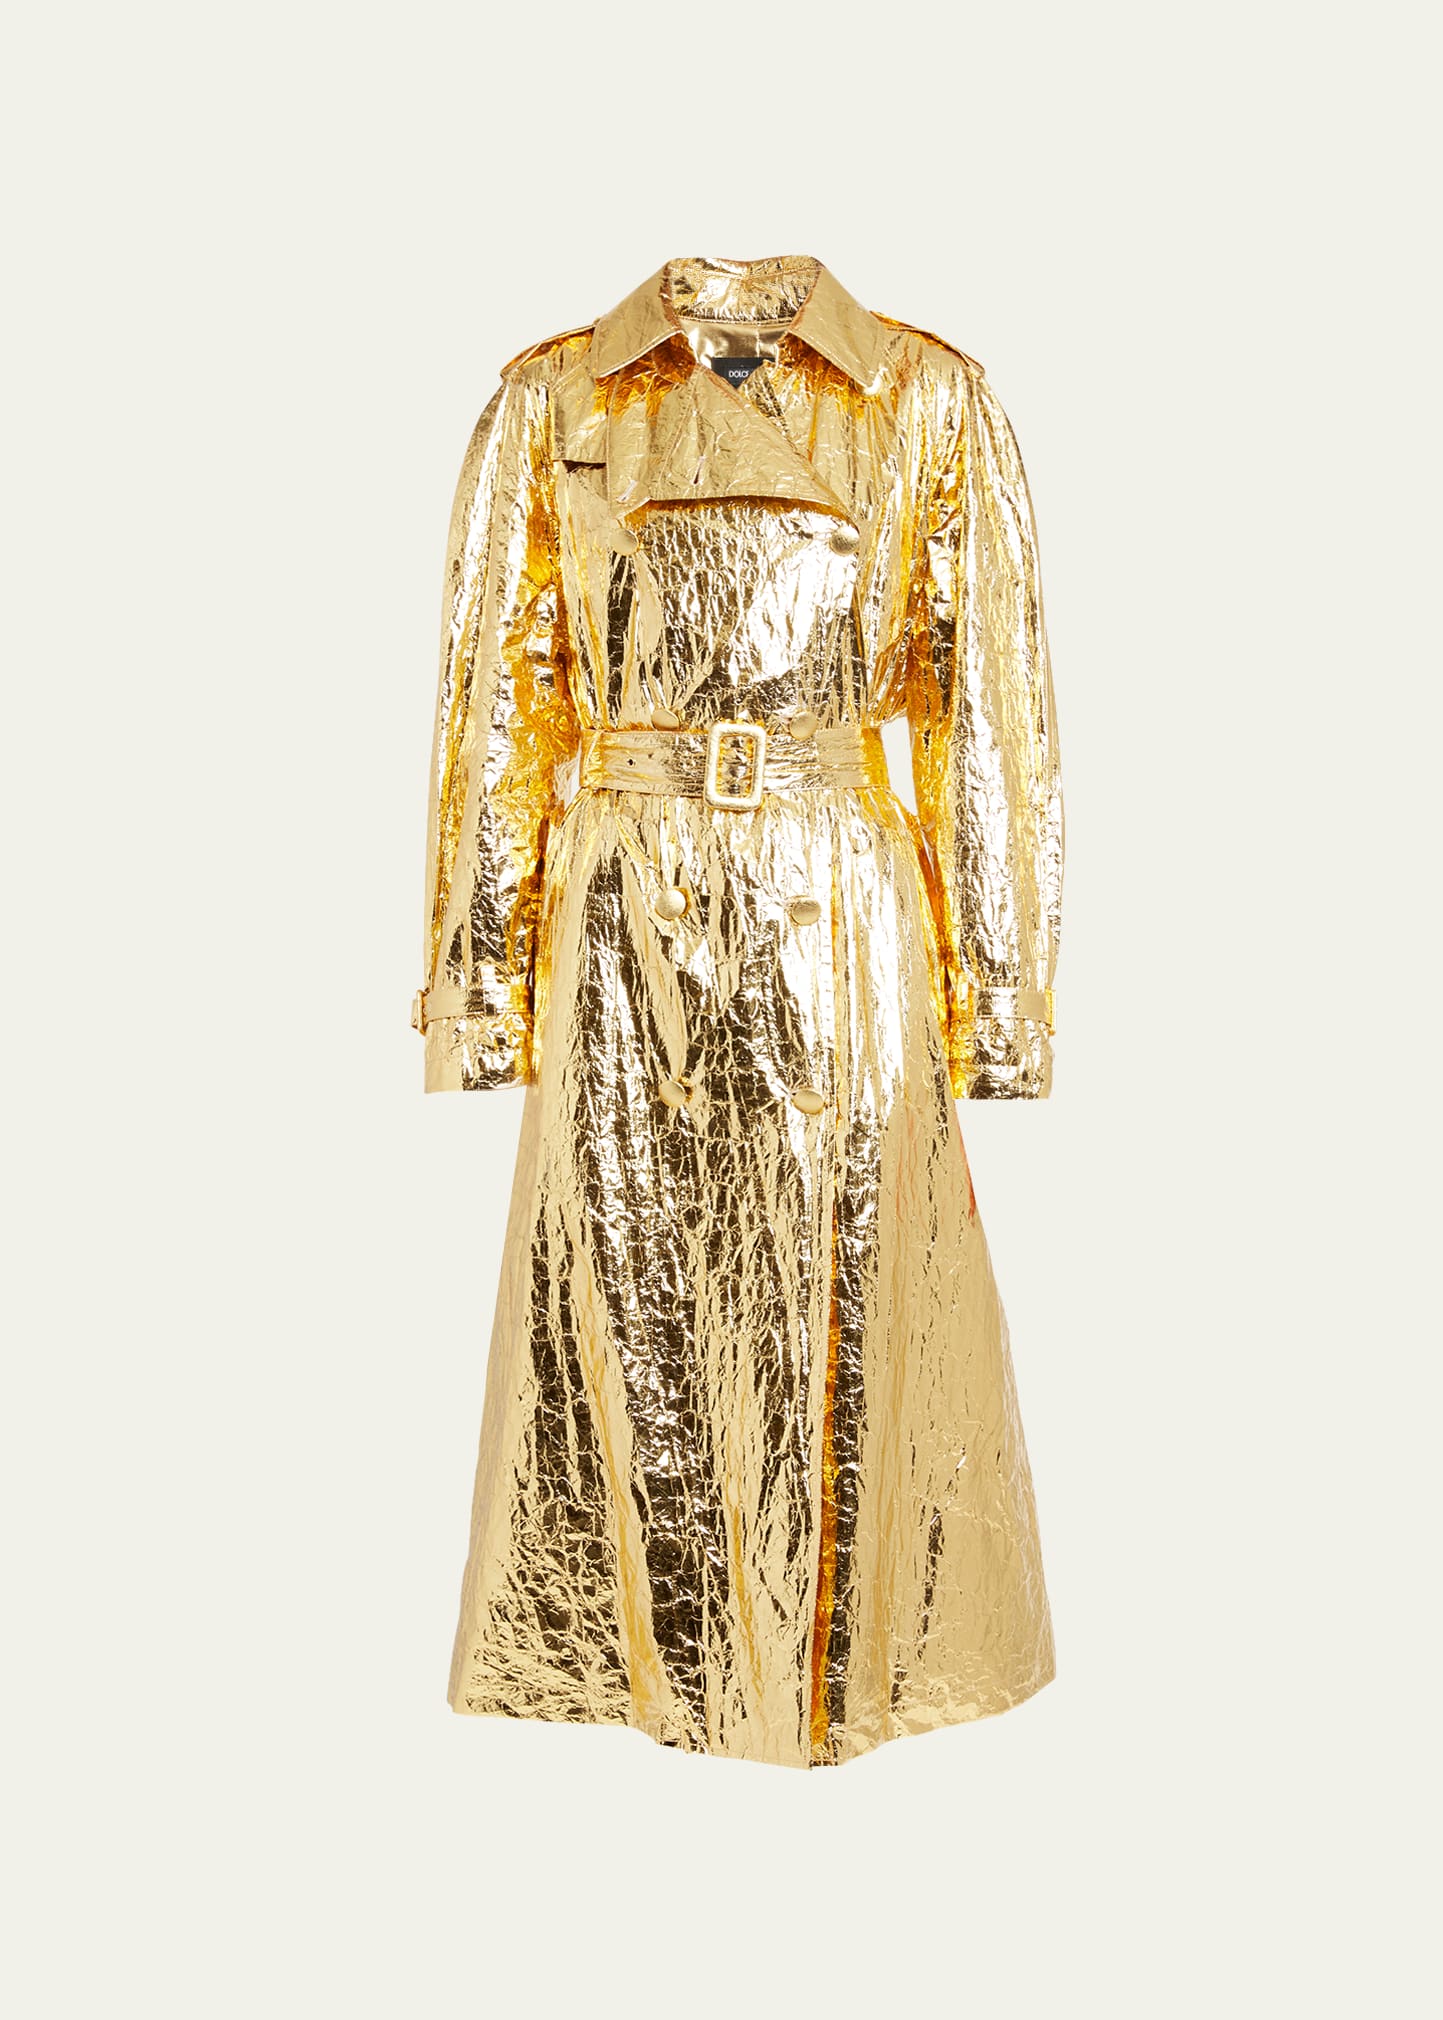 DOLCE & GABBANA CRINKLED METALLIC TRENCH COAT WITH BELT